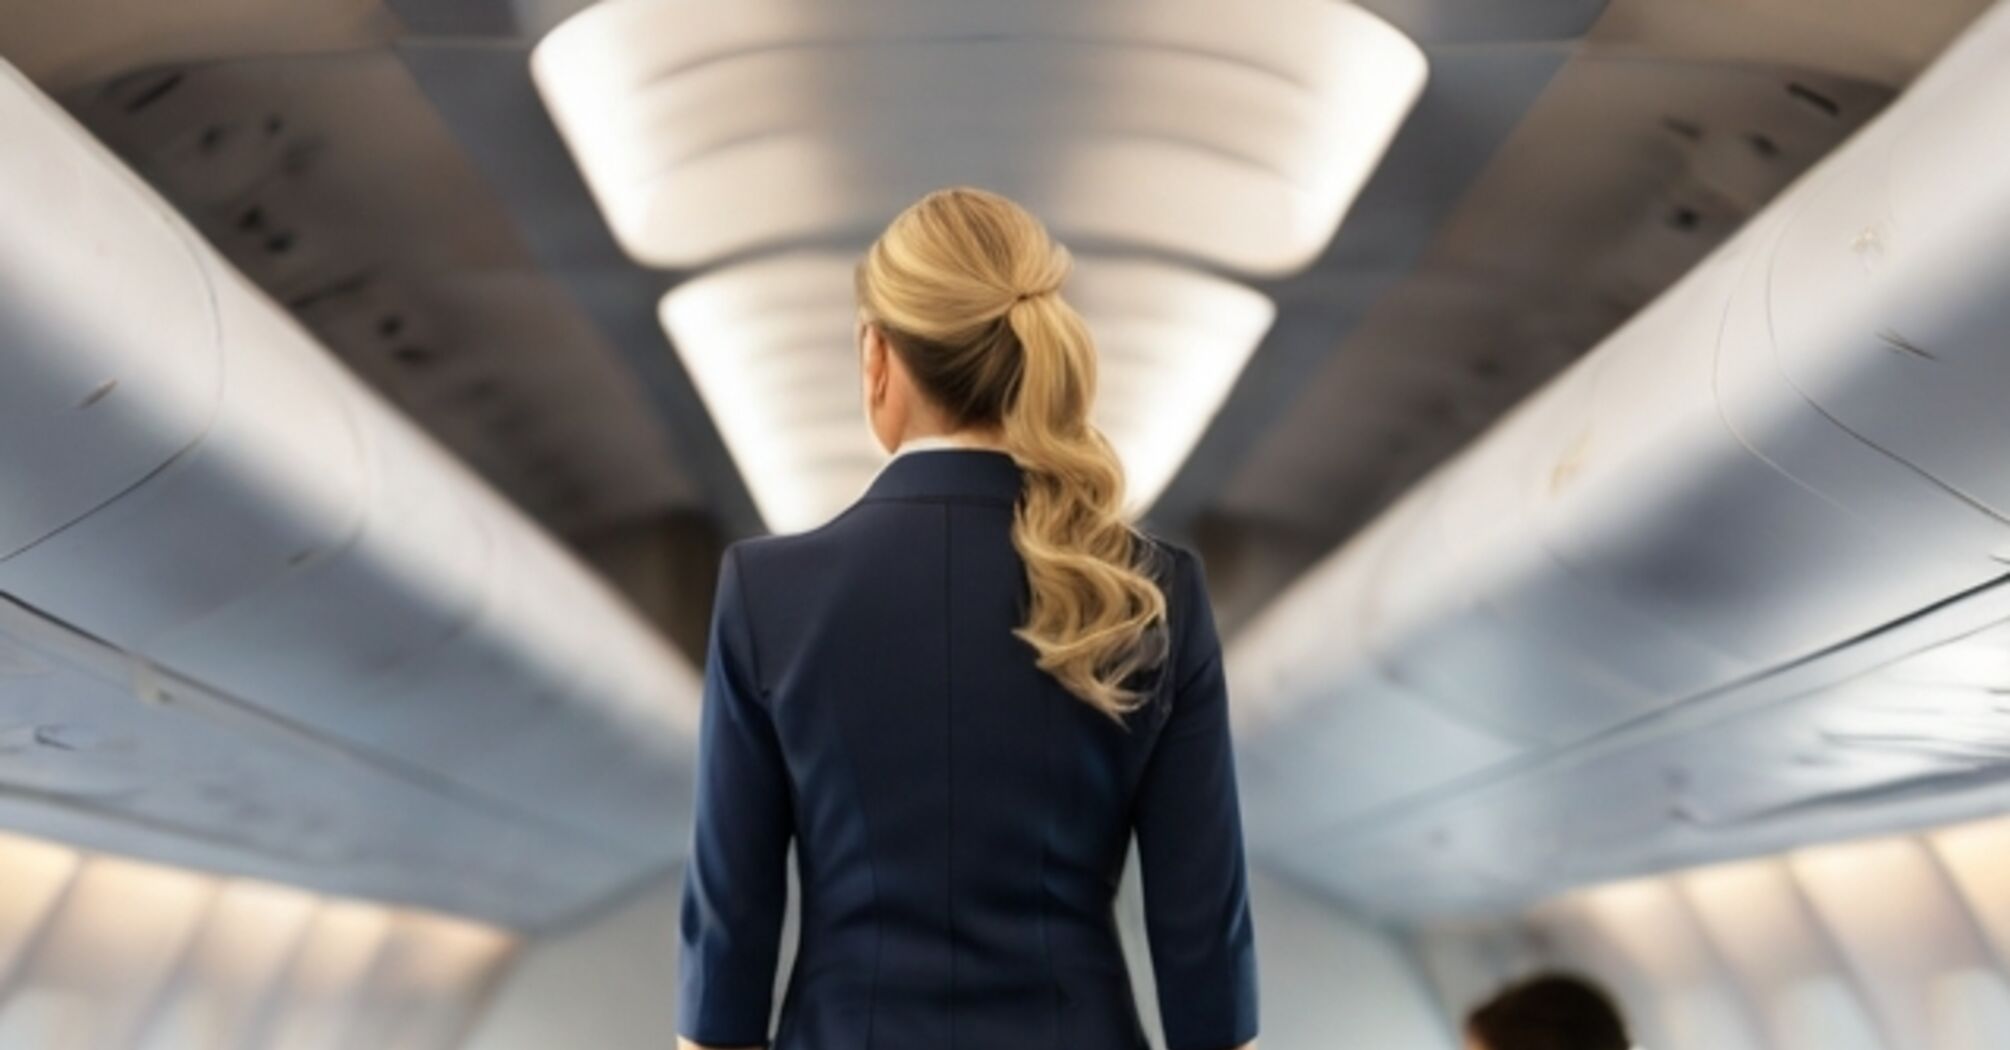 Stewardess answers 5 frequently asked questions about her job that passengers are concerned about